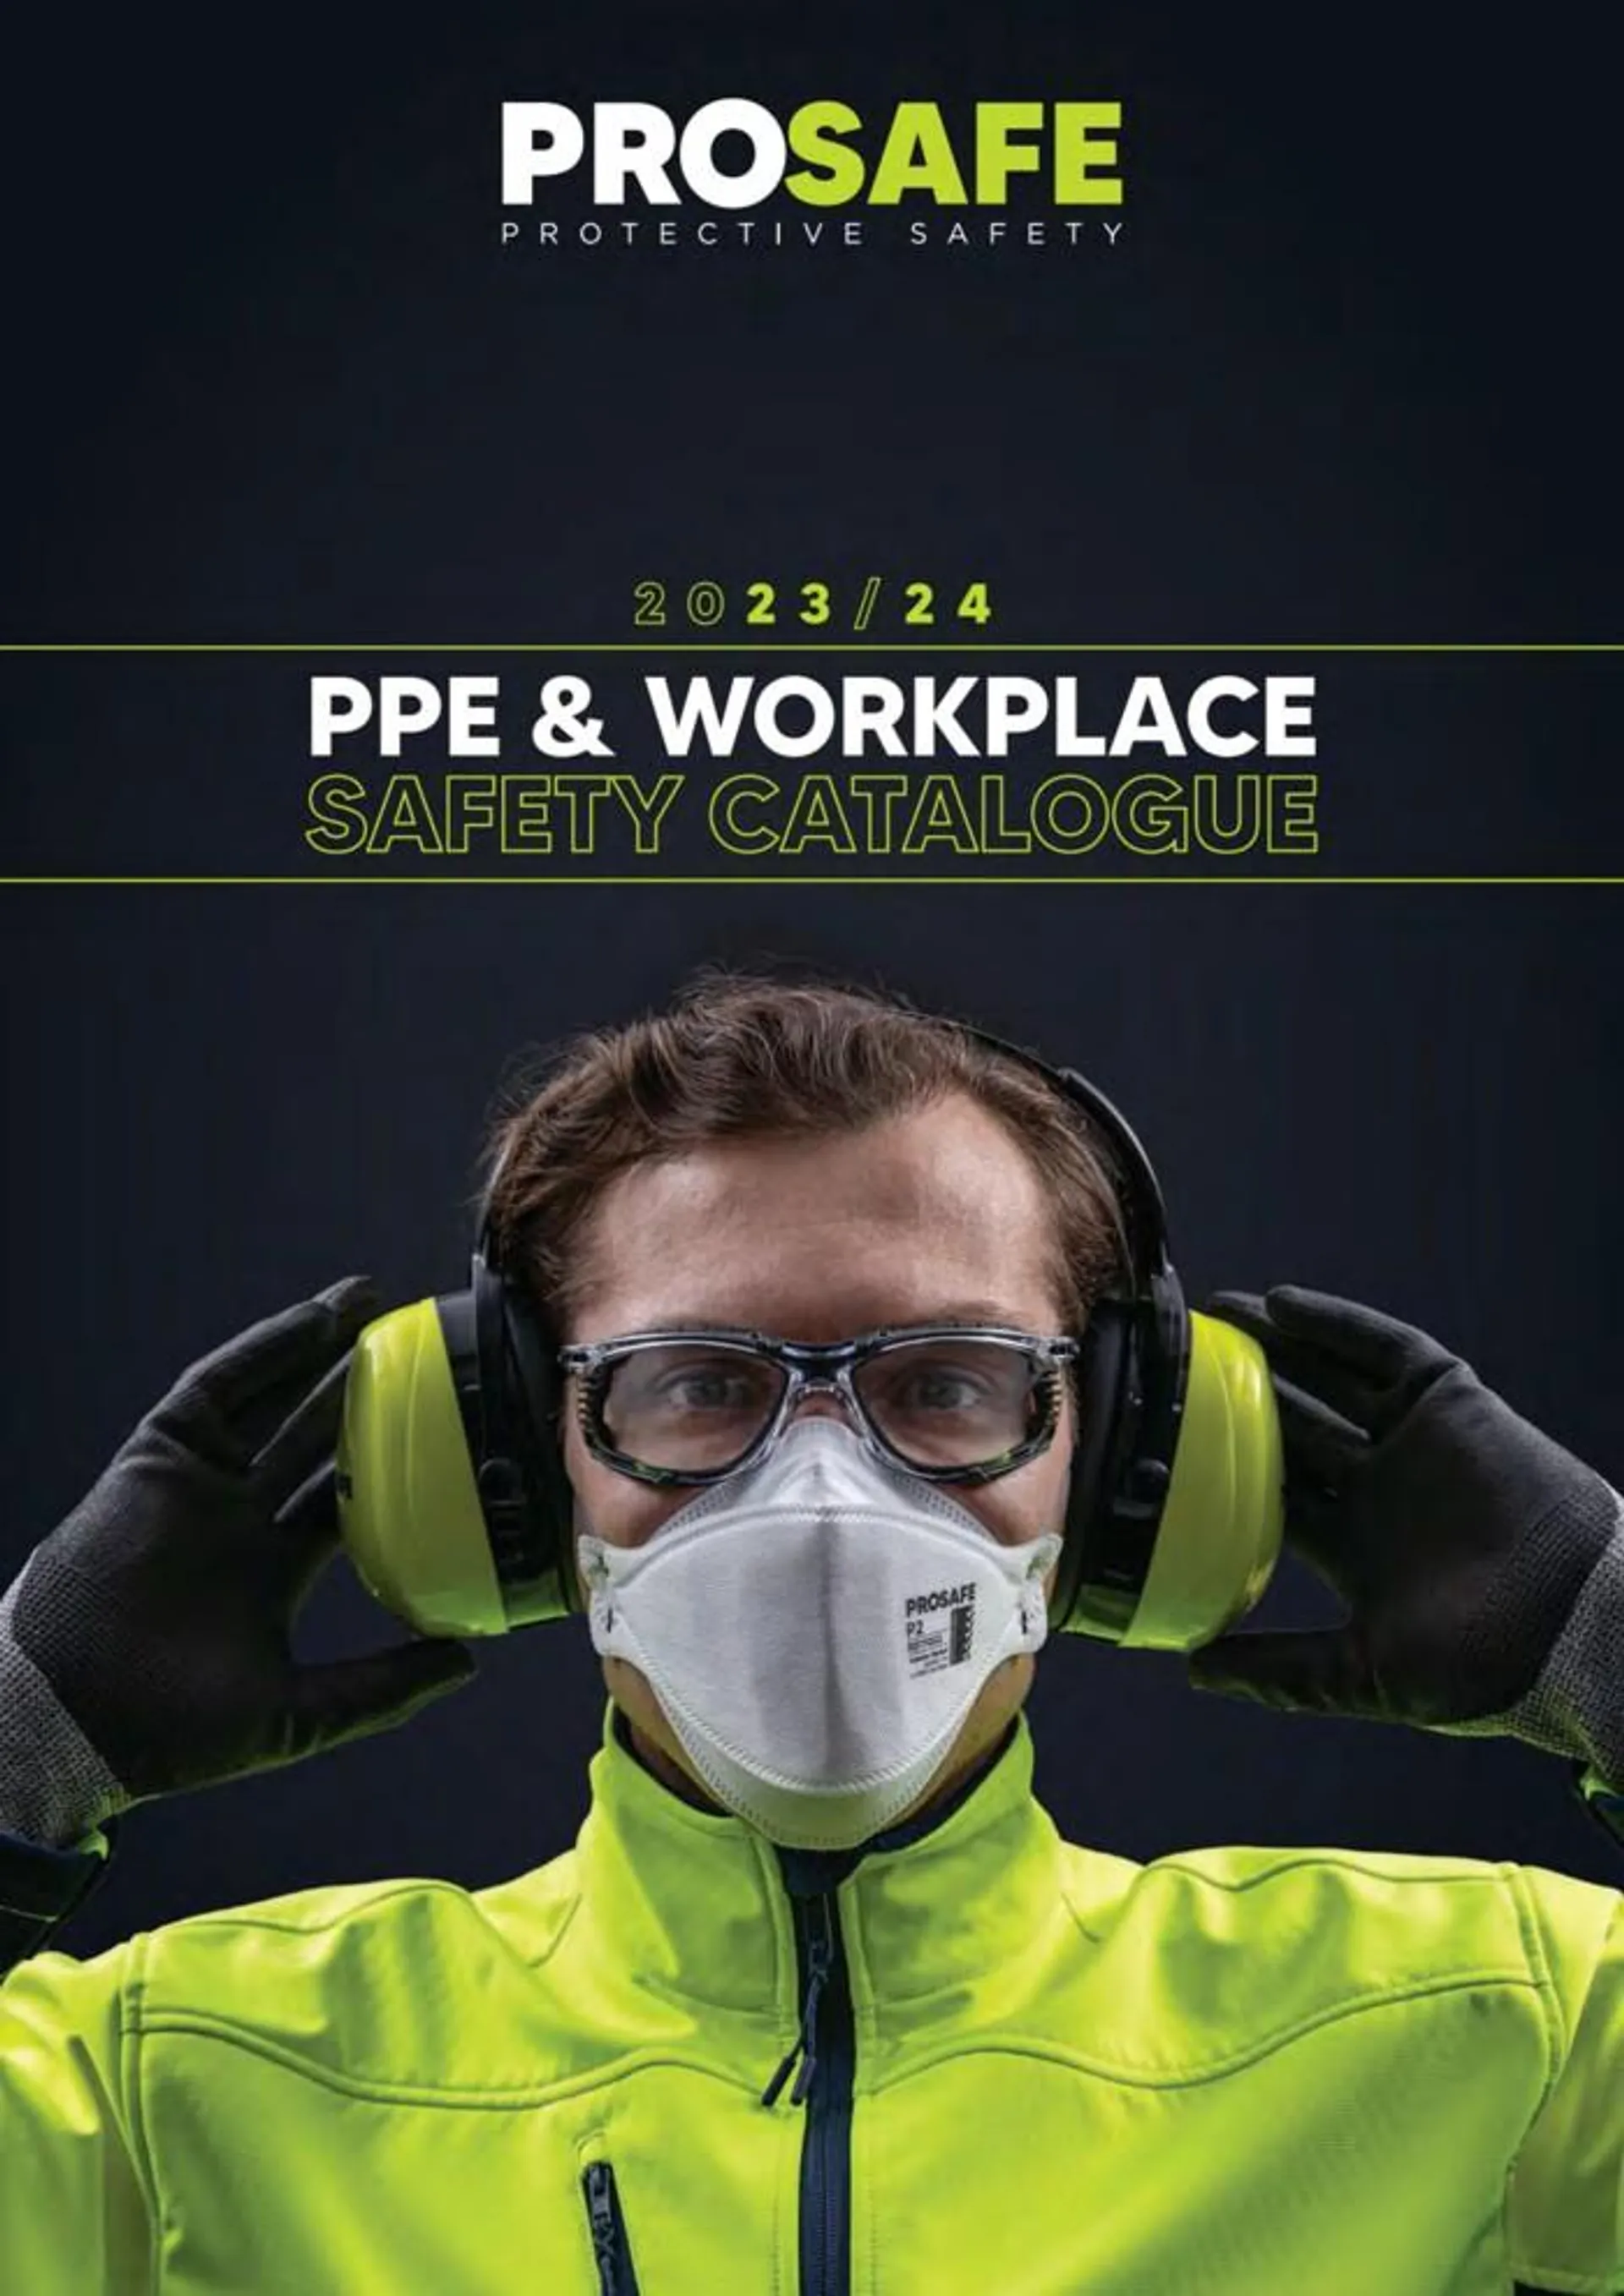 Ppe & Workplace Safety Catalogue 2023_24 - 1